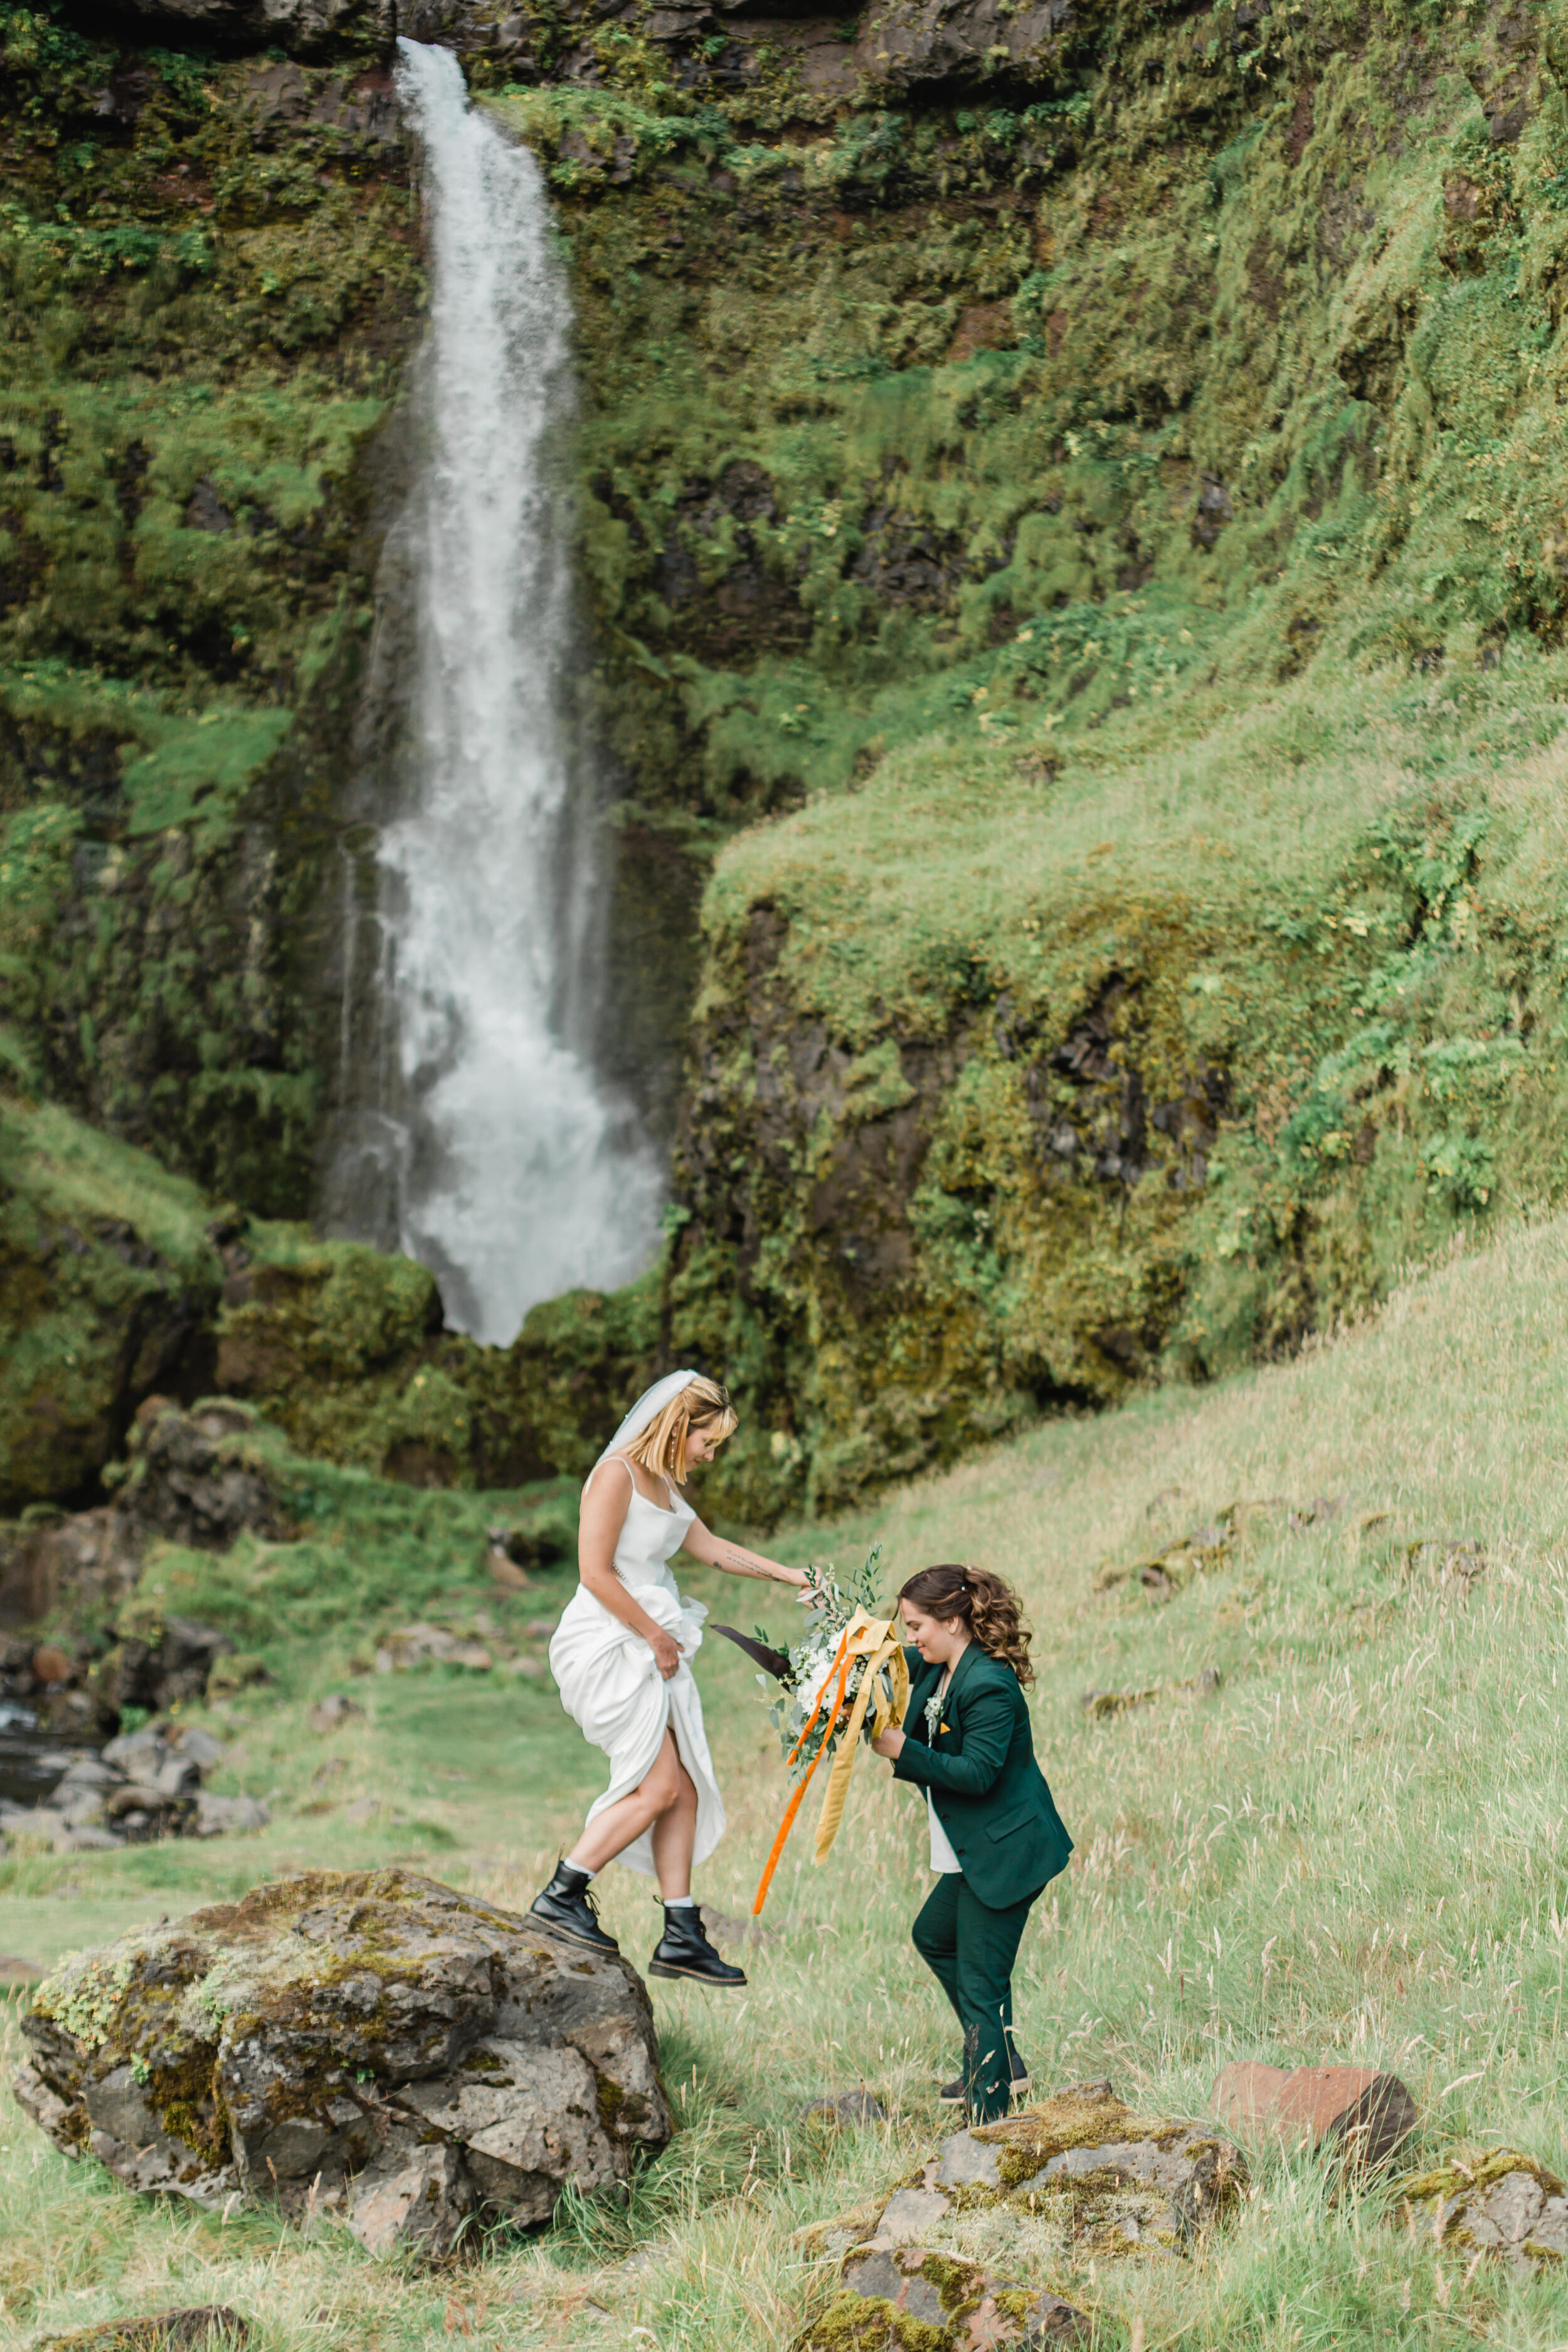 A woman helps her bride down from a rock while adventuring in Iceland during their wedding.